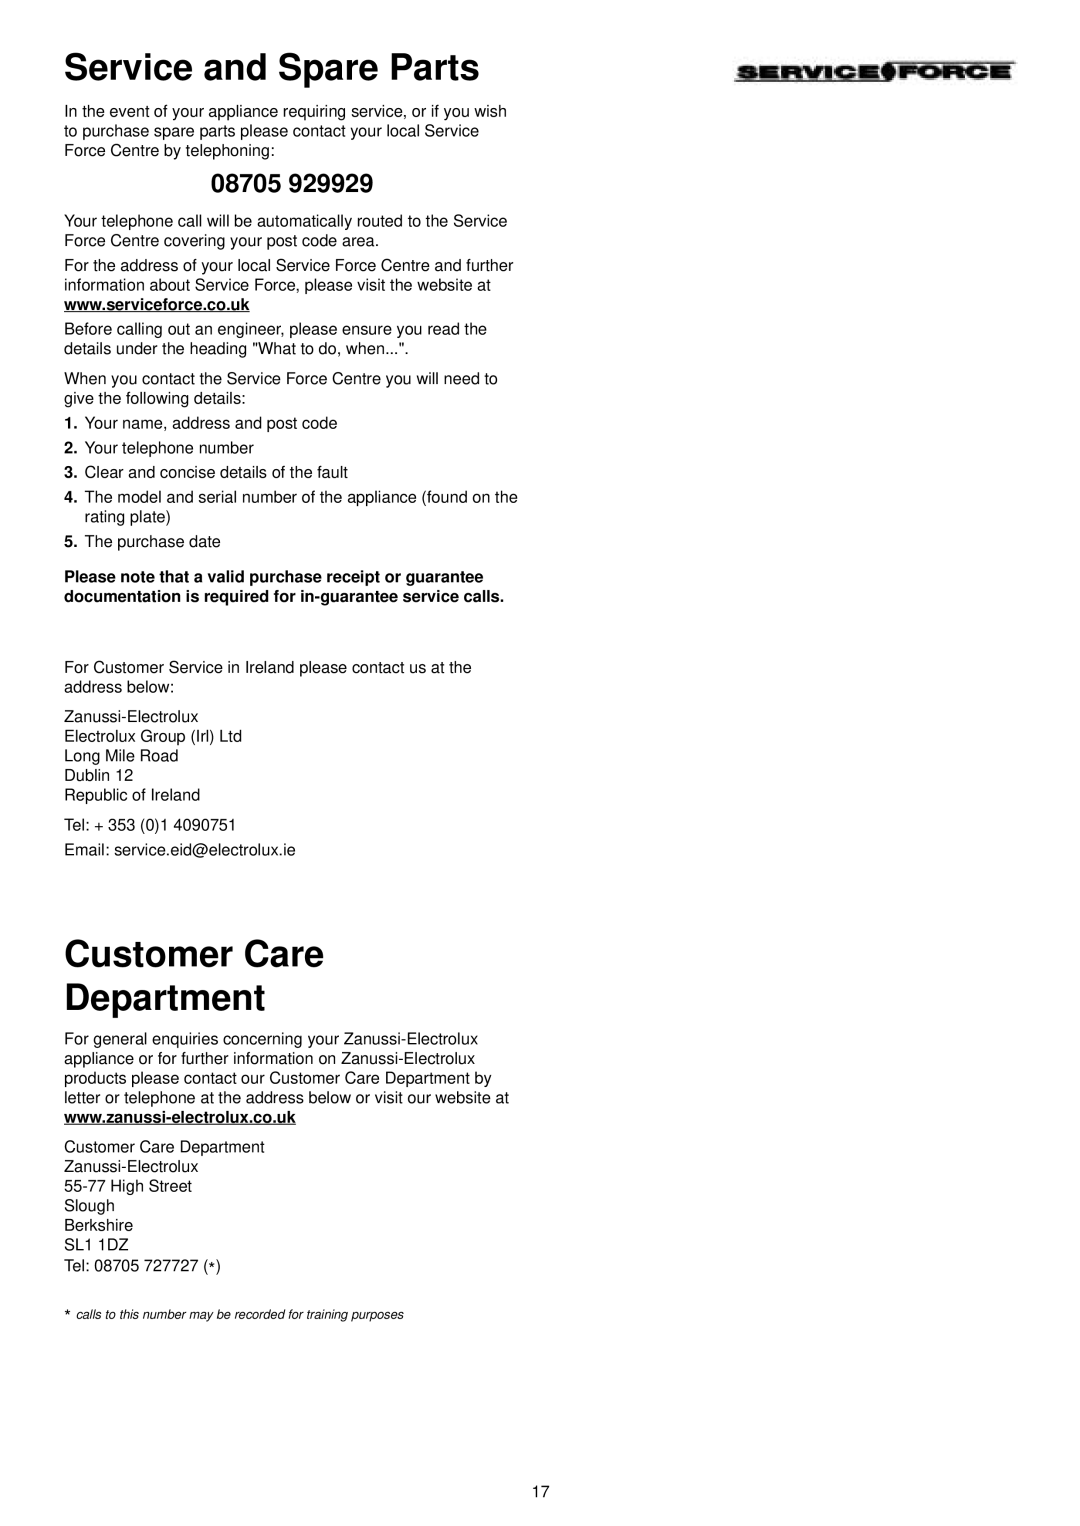 Zanussi ZSF 4111 manual Service and Spare Parts, Customer Care Department, 08705 